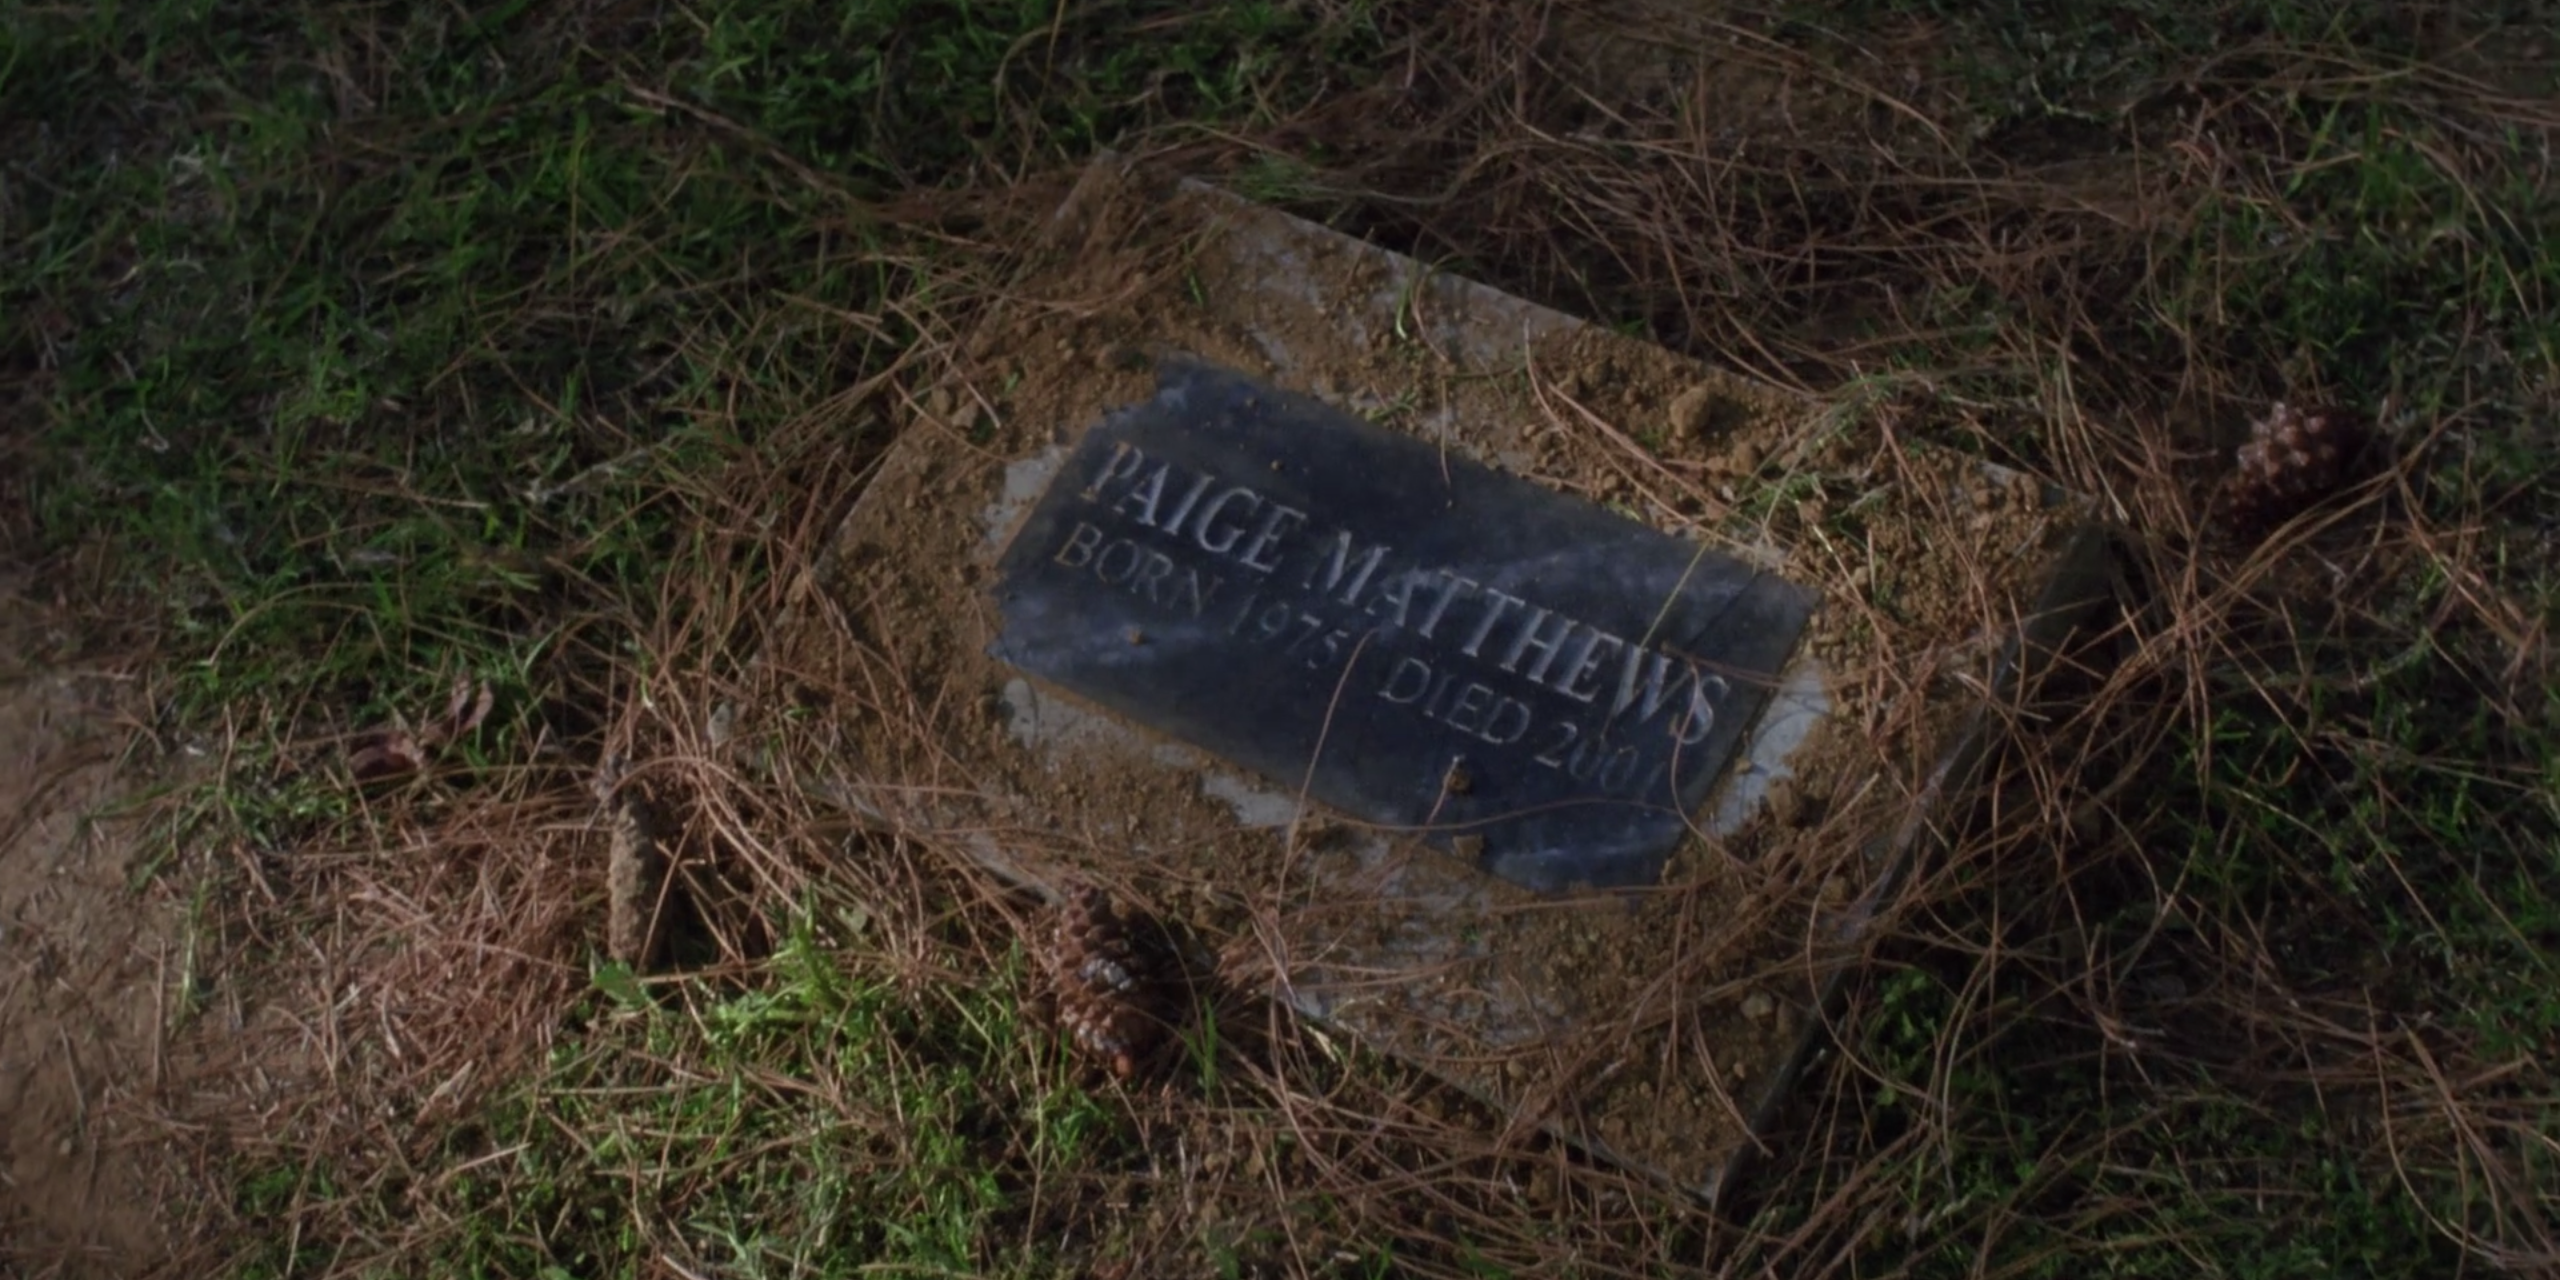 Paige Matthews's tombstone in Charmed (Born 1975, Died 2001)